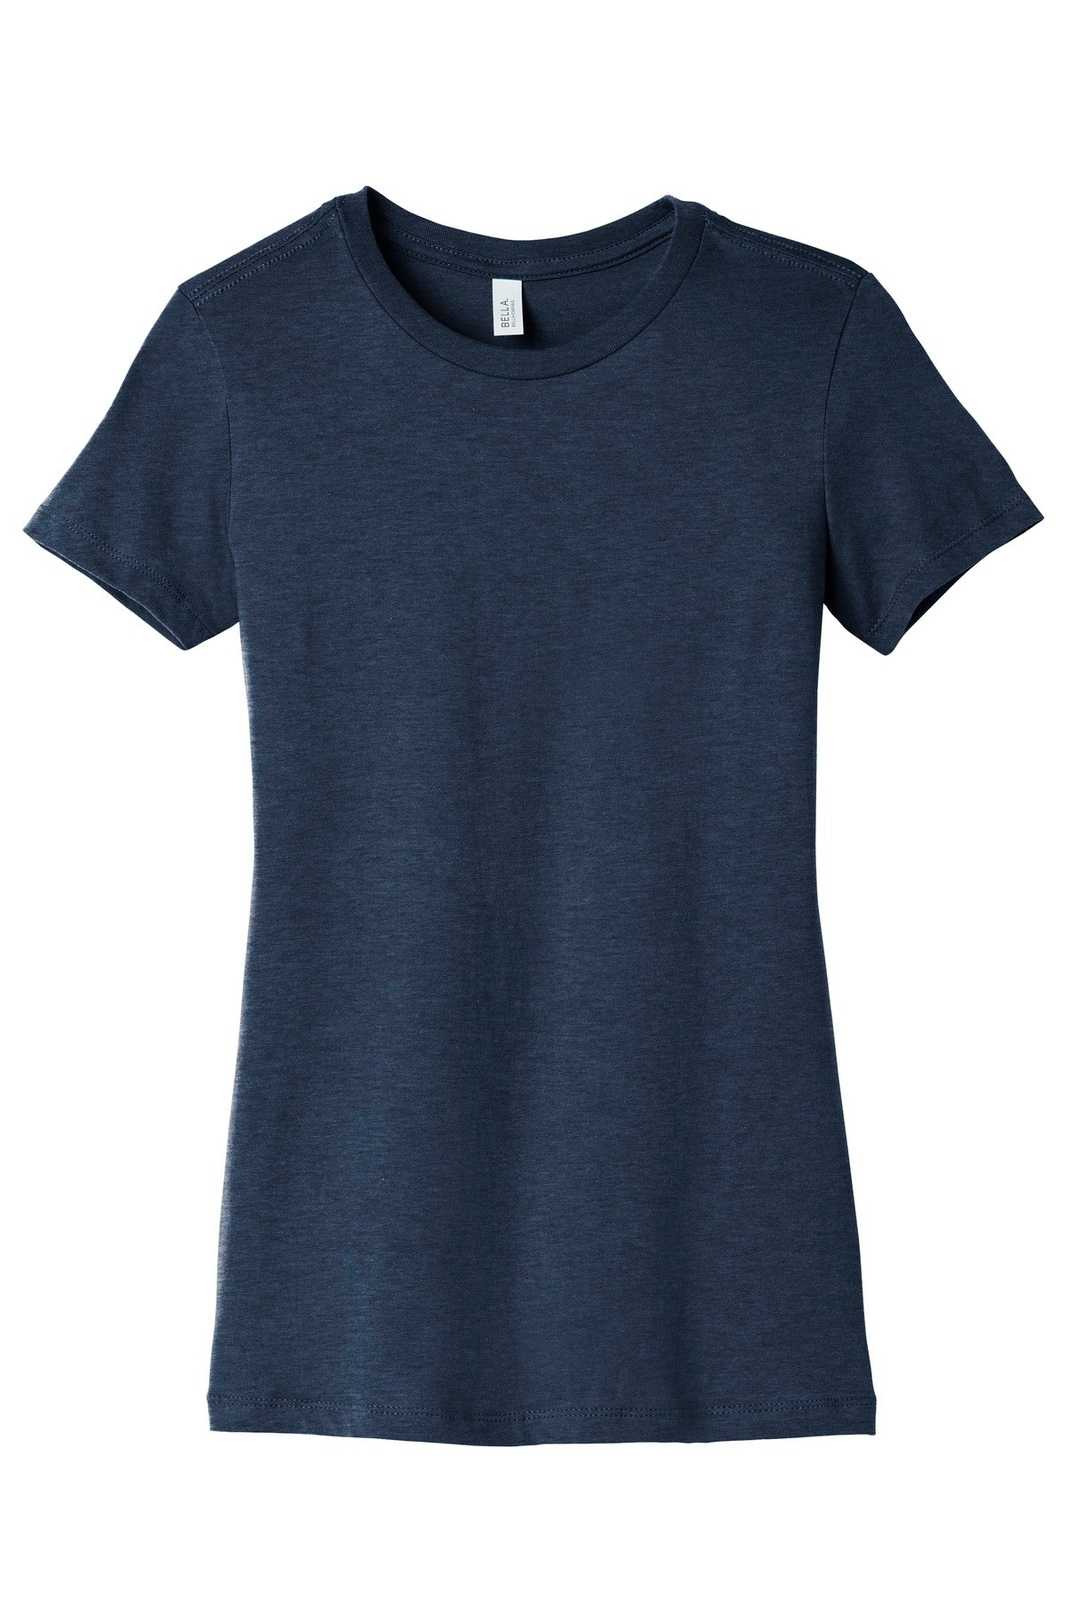 Bella + Canvas 6004 Women's The Favorite Tee - Heather Navy - HIT a Double